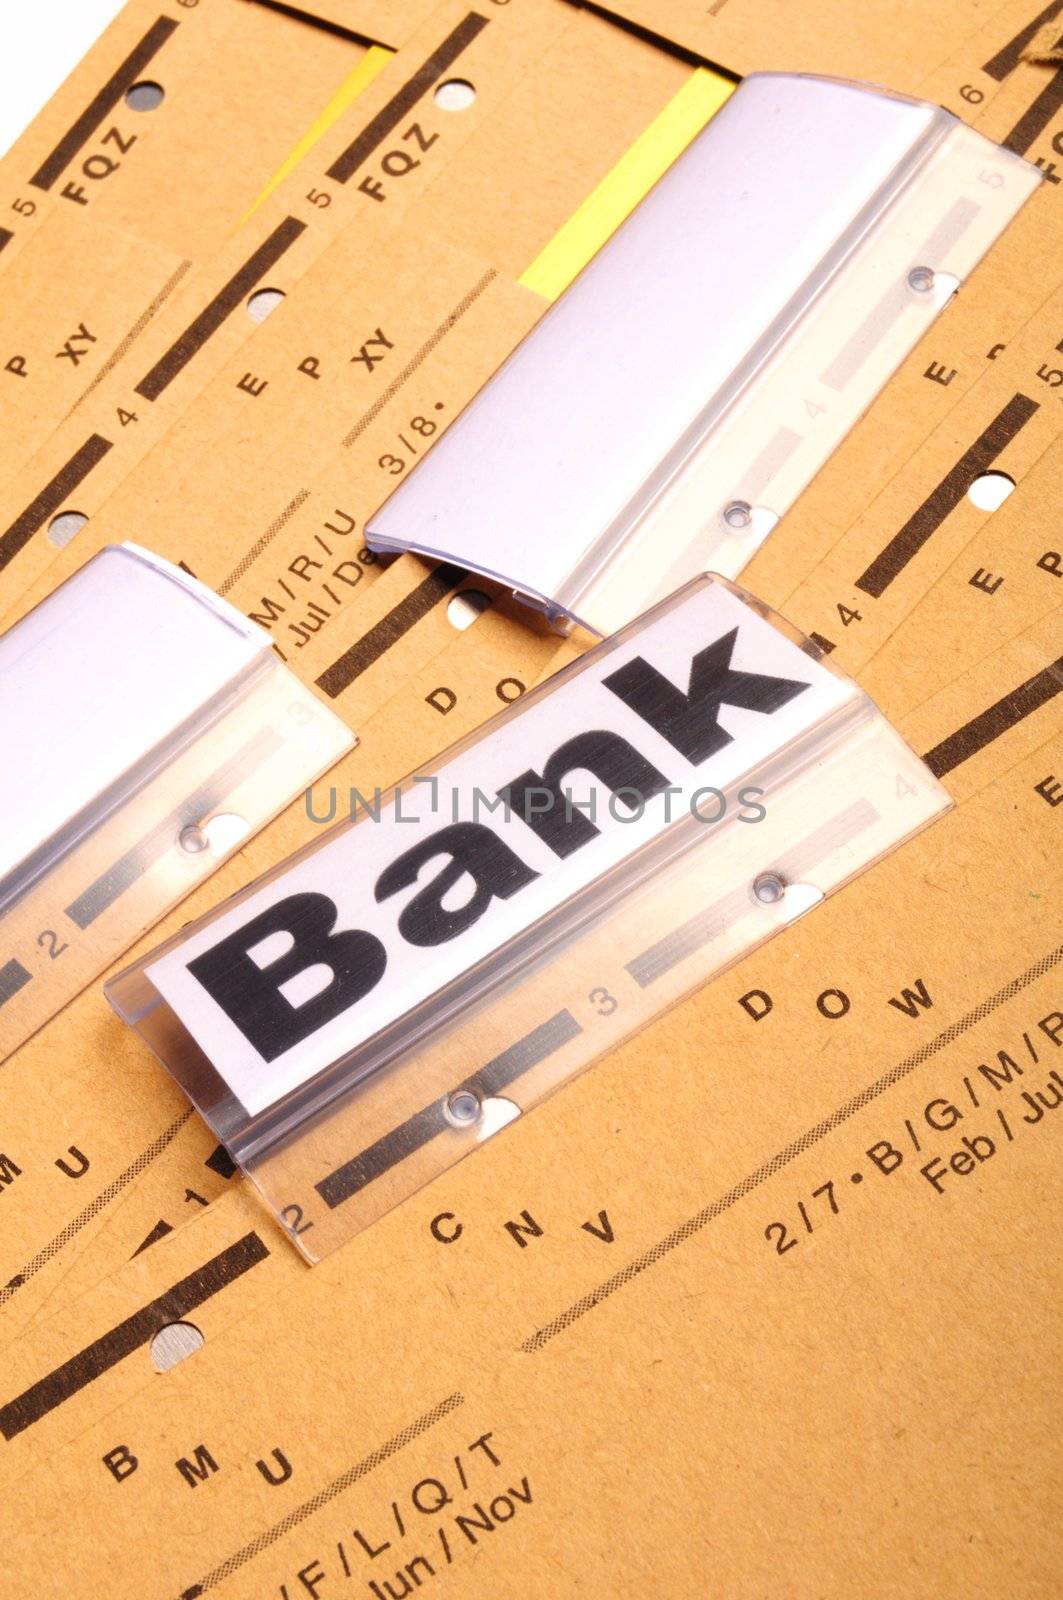 bank or banking word on tab folder showing finance or financial success concept